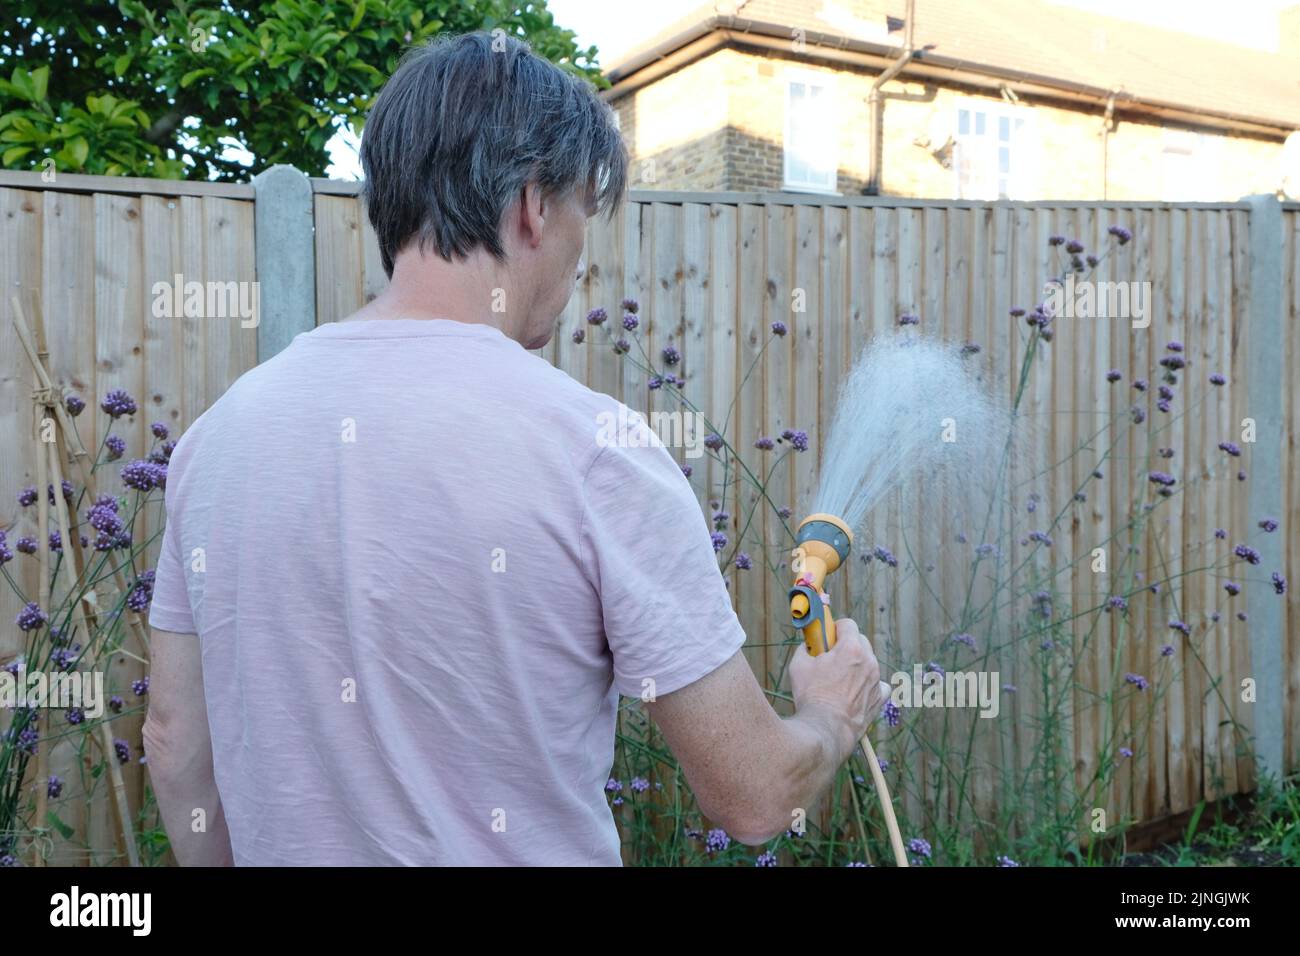 London, UK, 11th August, 2022.  A man uses a hosepipe to water flowerbeds on a summer's evening as a drought is likely to be declared by the Environmental Agency (EA) on Friday after a lack of rainfall and a long-term forecast of dry weather.  Water companies can decide individually to implement restrictions and Thames Water announced a hosepipe ban 'in the coming weeks' for non-essential uses such as filling a paddling pool, washing cars and watering gardens. Credit: Eleventh Hour Photography/Alamy Live News Stock Photo